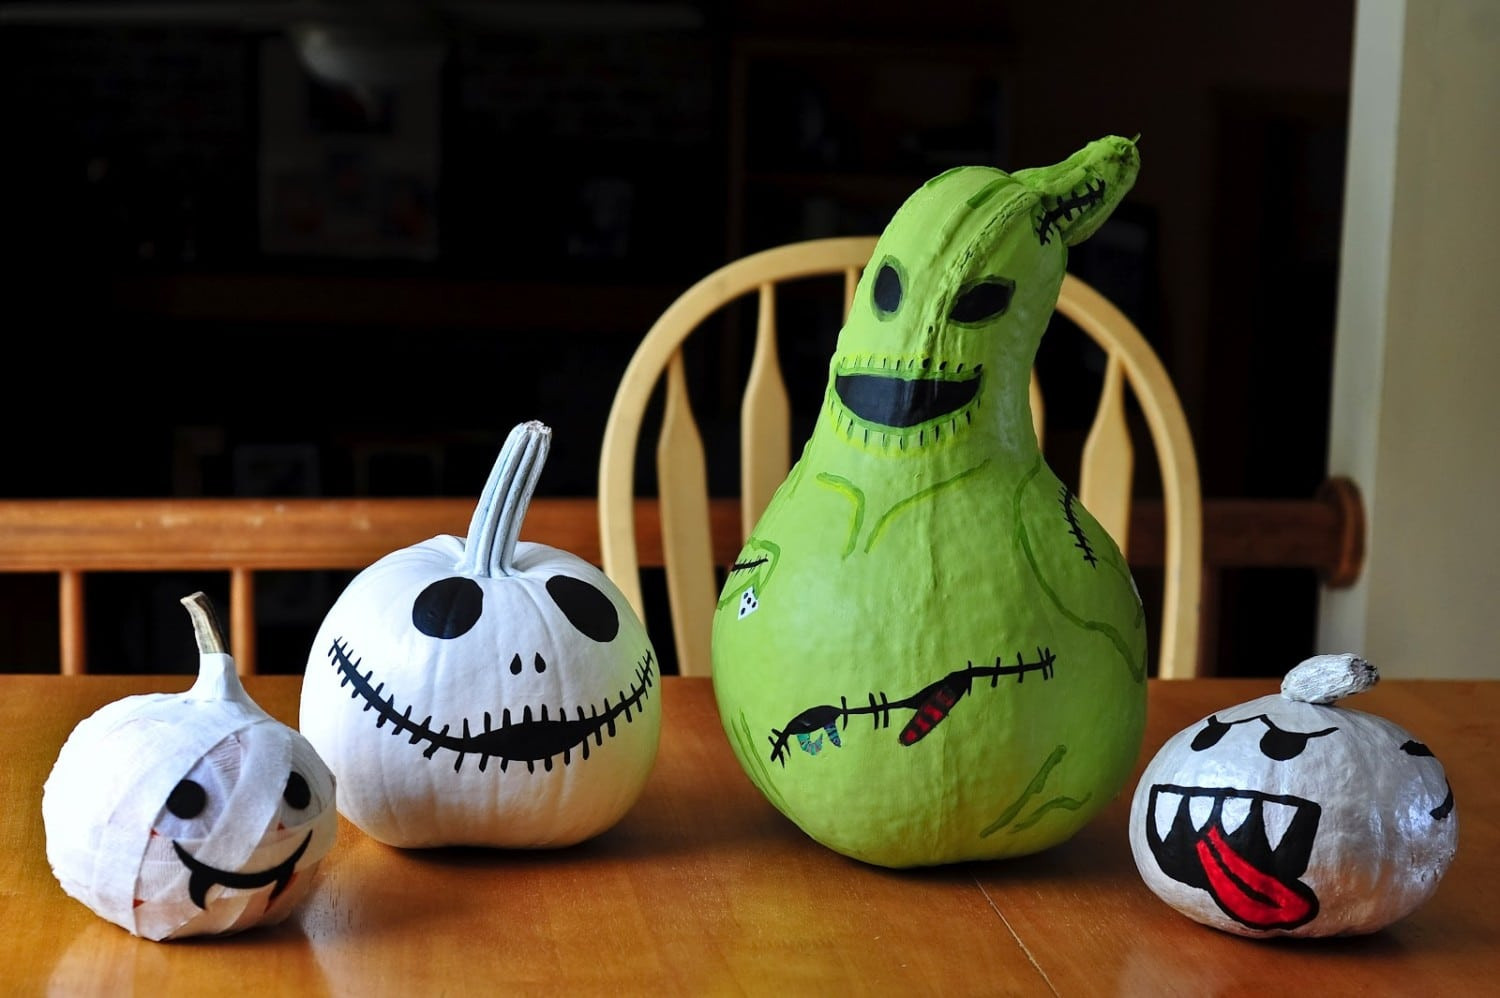 DIY Nightmare Before Christmas Decorations
 Nightmare Before Christmas Party Ideas Simplemost